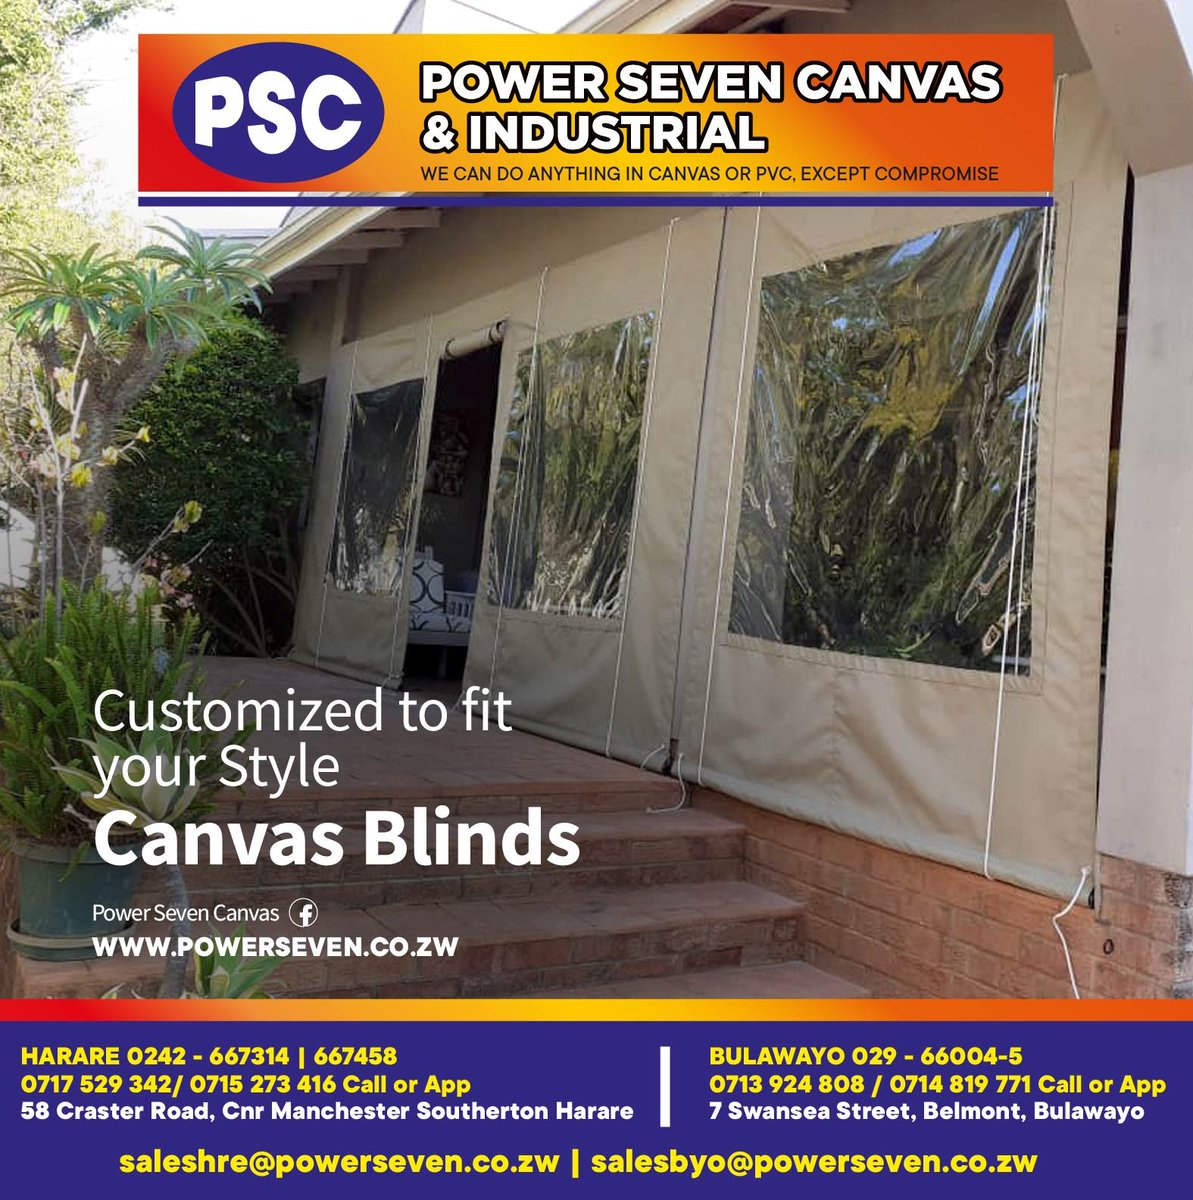 Want to add a personal touch to your outdoor shade solutions? Look no further than our customized Canvas Blinds! With various colors, patterns, and sizes available, you can create a truly unique look for your space. Contact us today to start designing! #PowerSevenCanvas